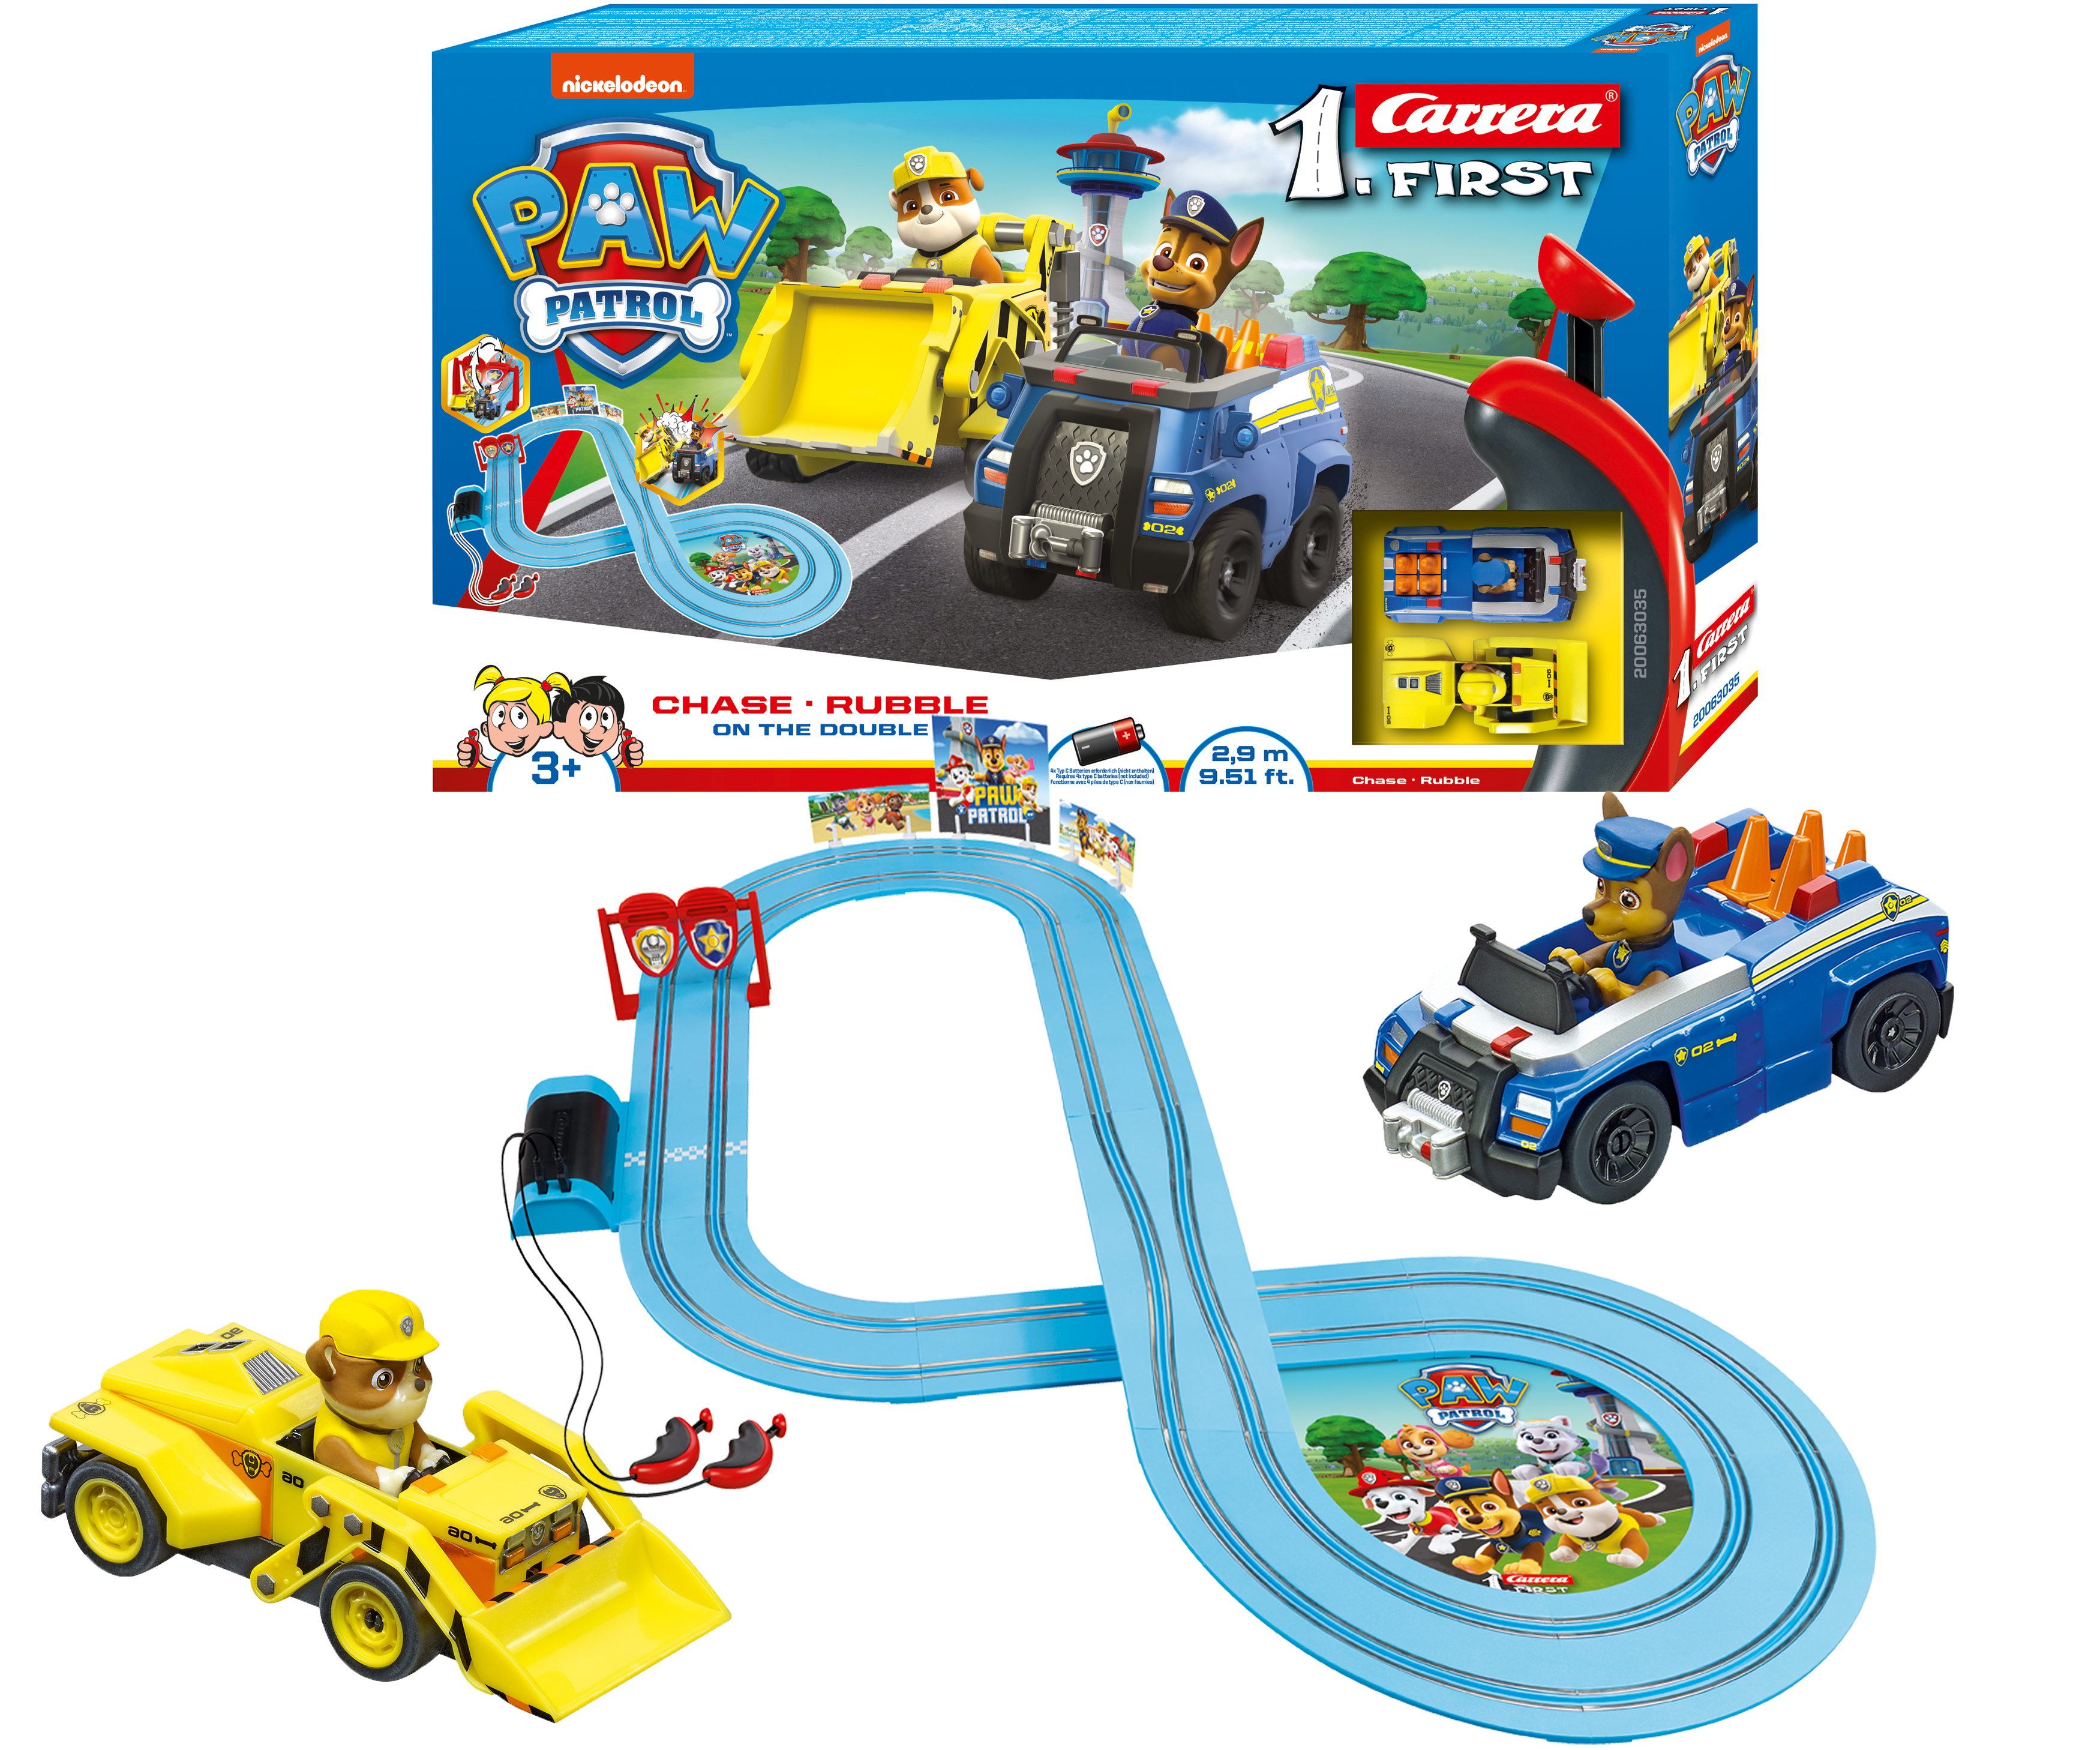 Carrera First 200 Paw Patrol - On the Double 2,9m